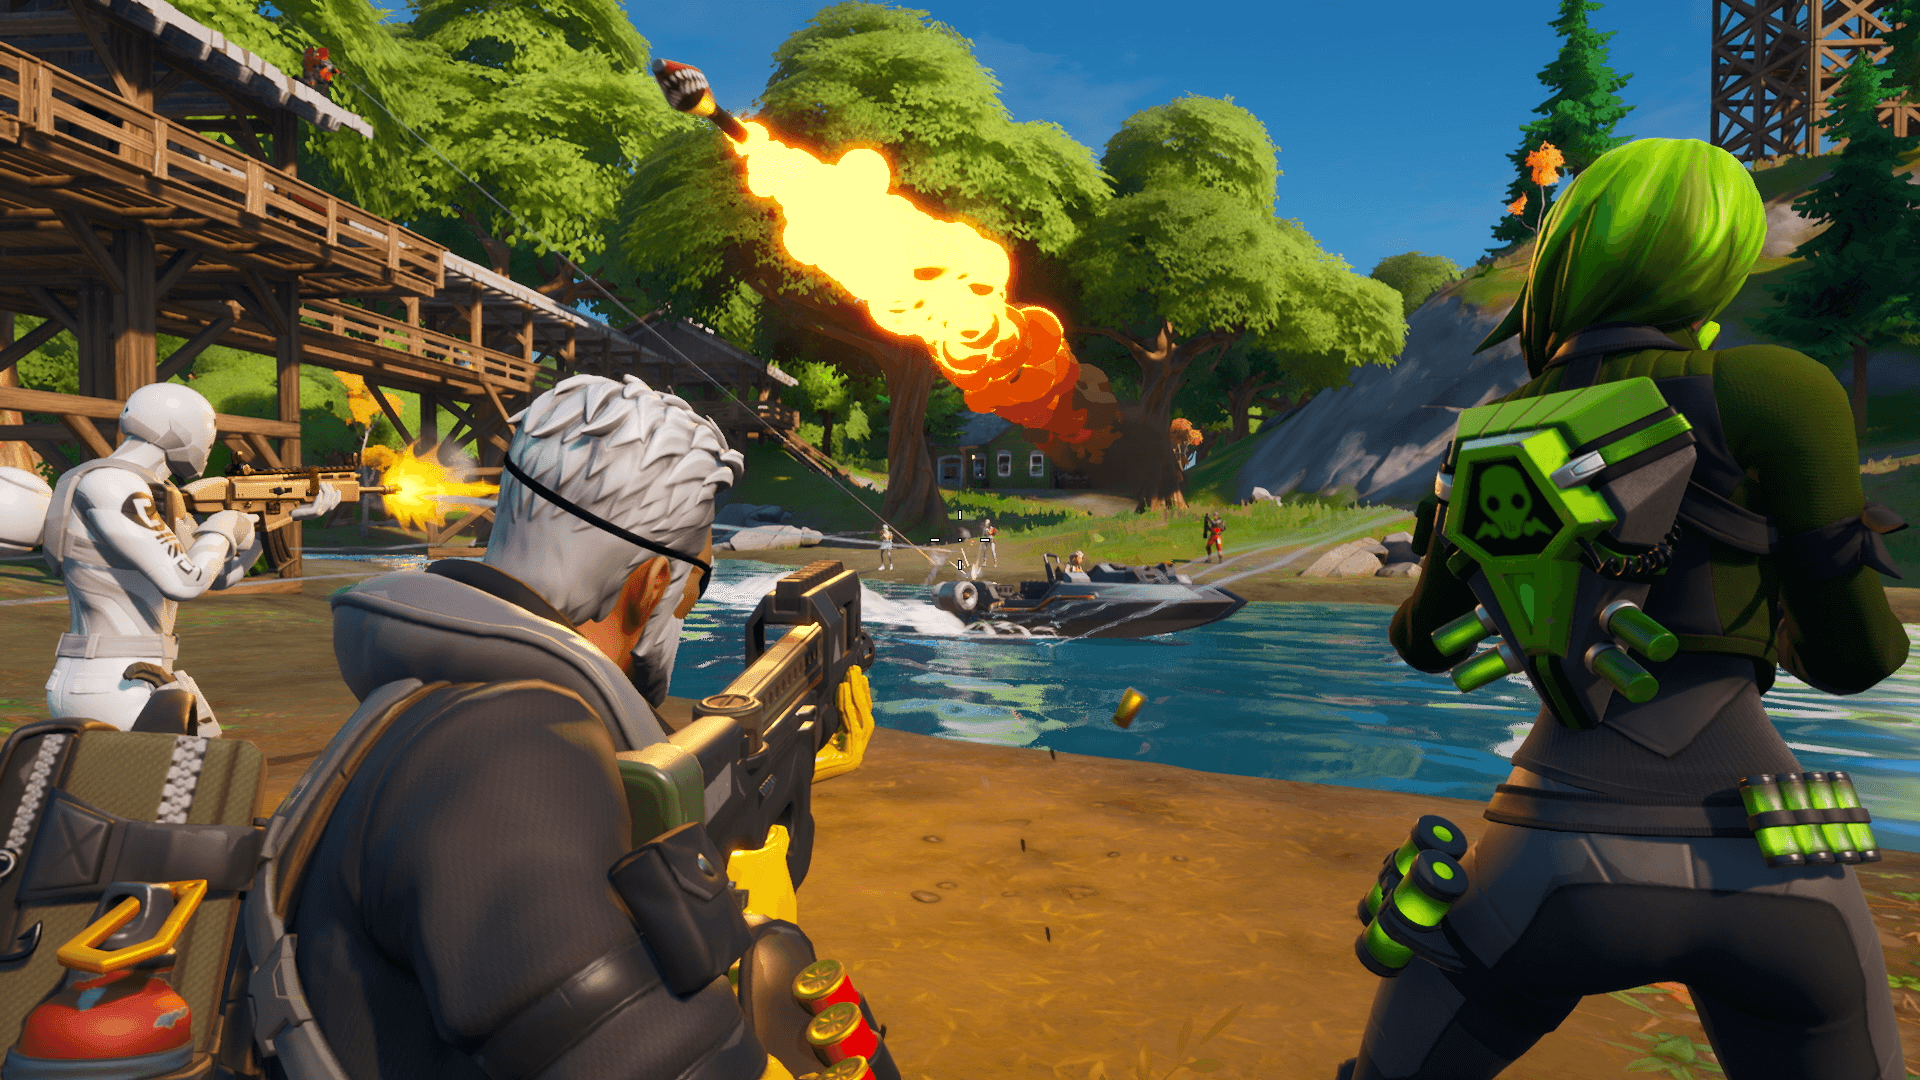 Fortnite players firing weapons at opponents.